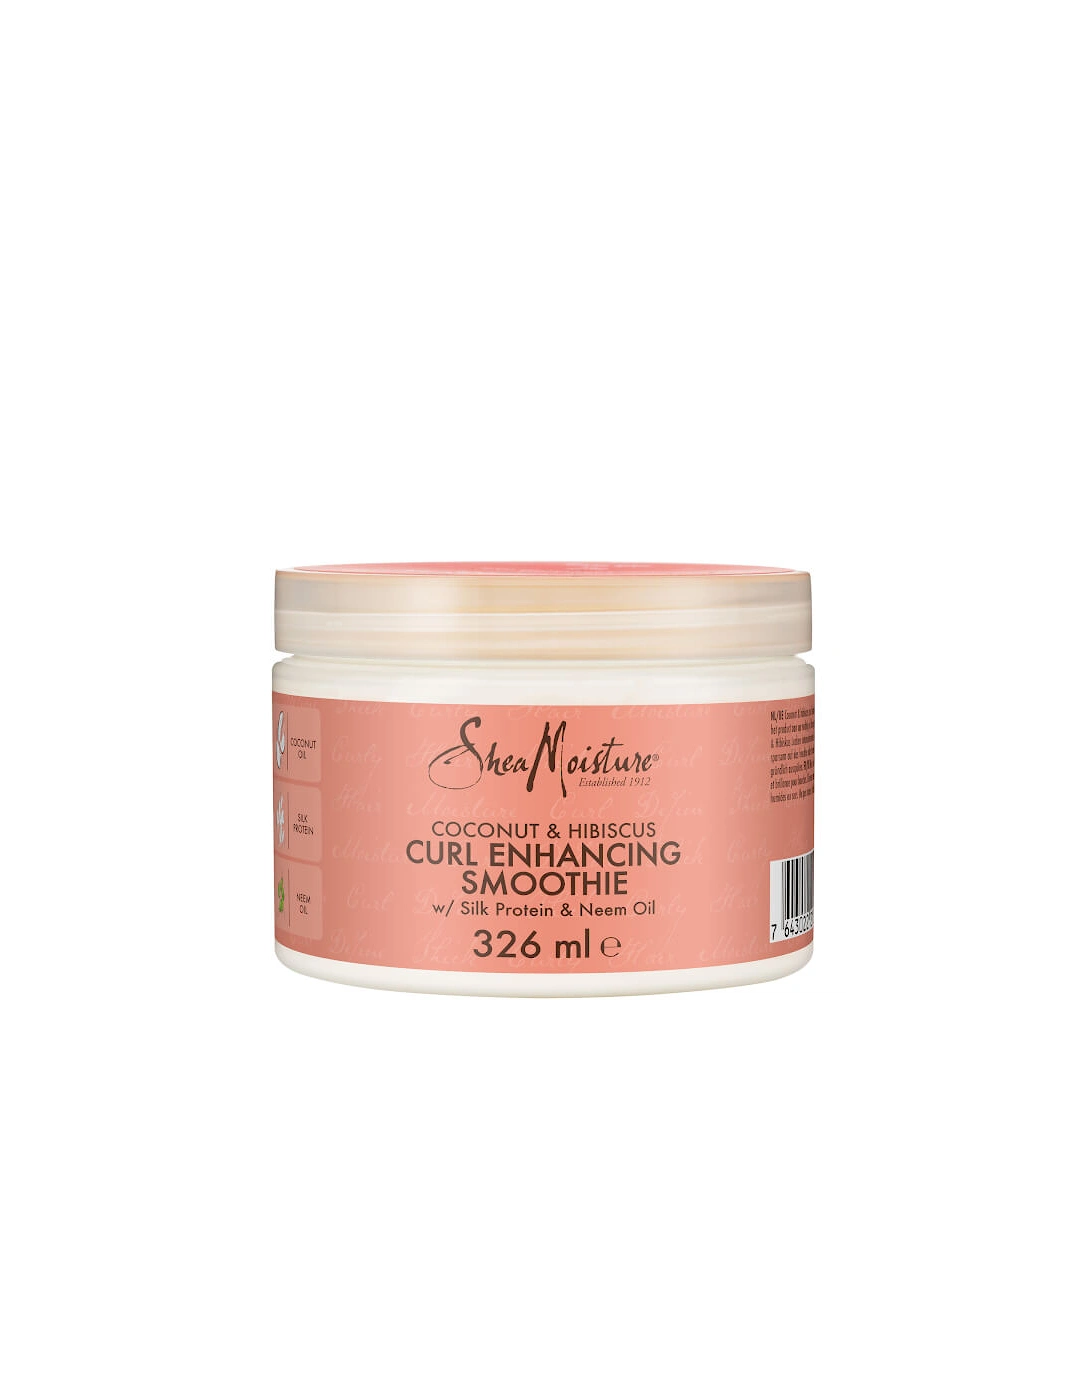 Coconut & Hibiscus Curl Enhancing Smoothie 326ml - SheaMoisture, 2 of 1